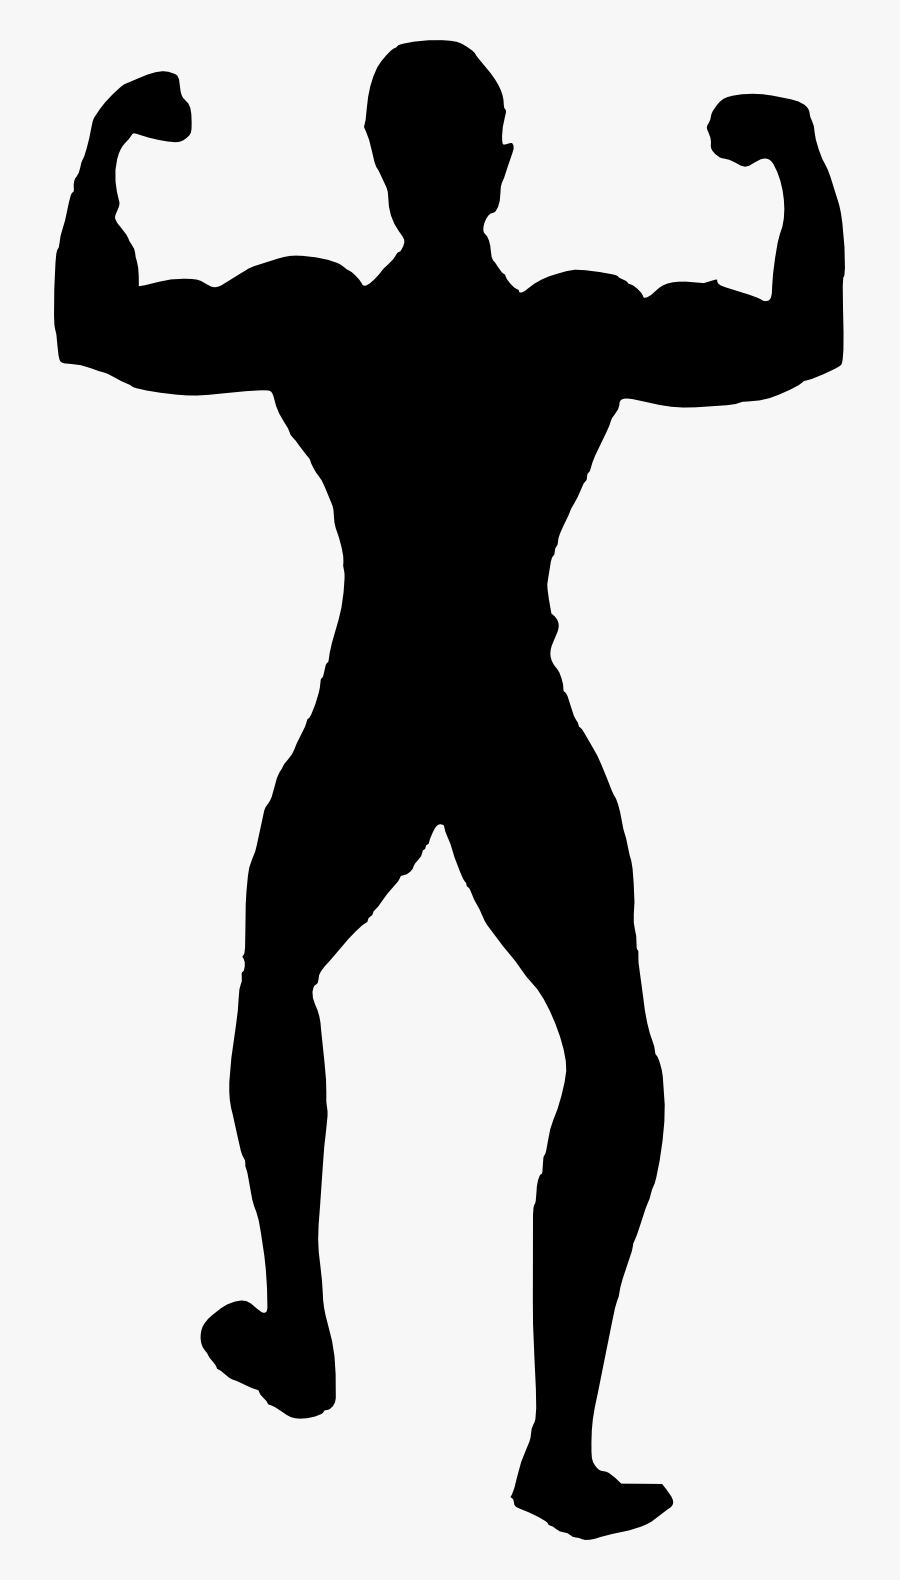 Muscle Man Bodybuilder Silhouette Png Free Png Images, Transparent Clipart